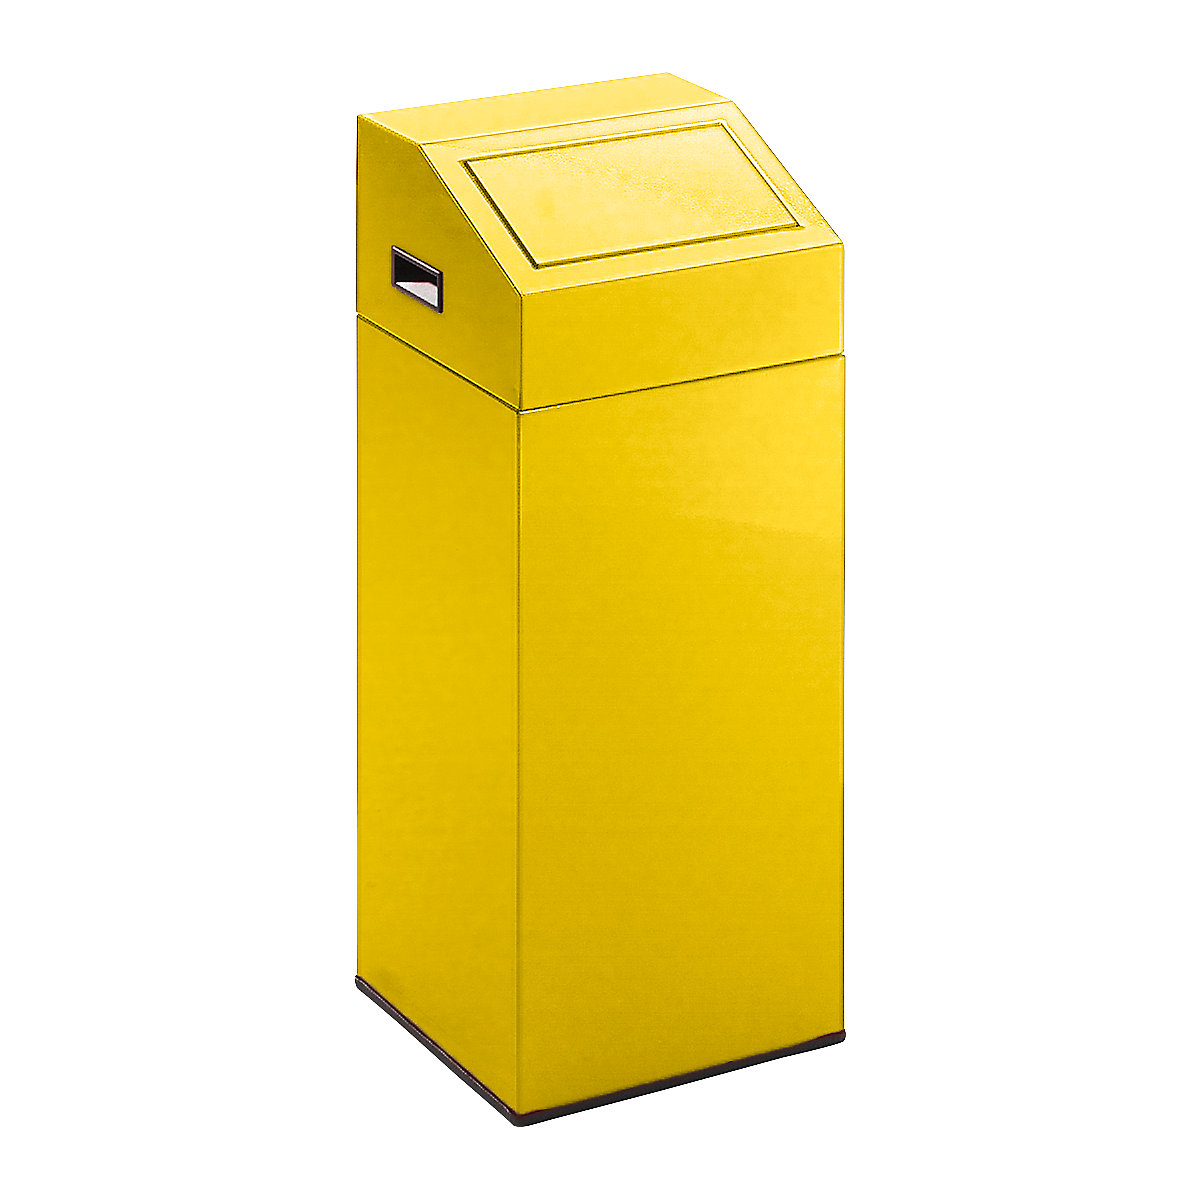 EUROKRAFTpro – Recyclable waste collector, capacity 45 l, WxHxD 320 x 790 x 320 mm, traffic yellow